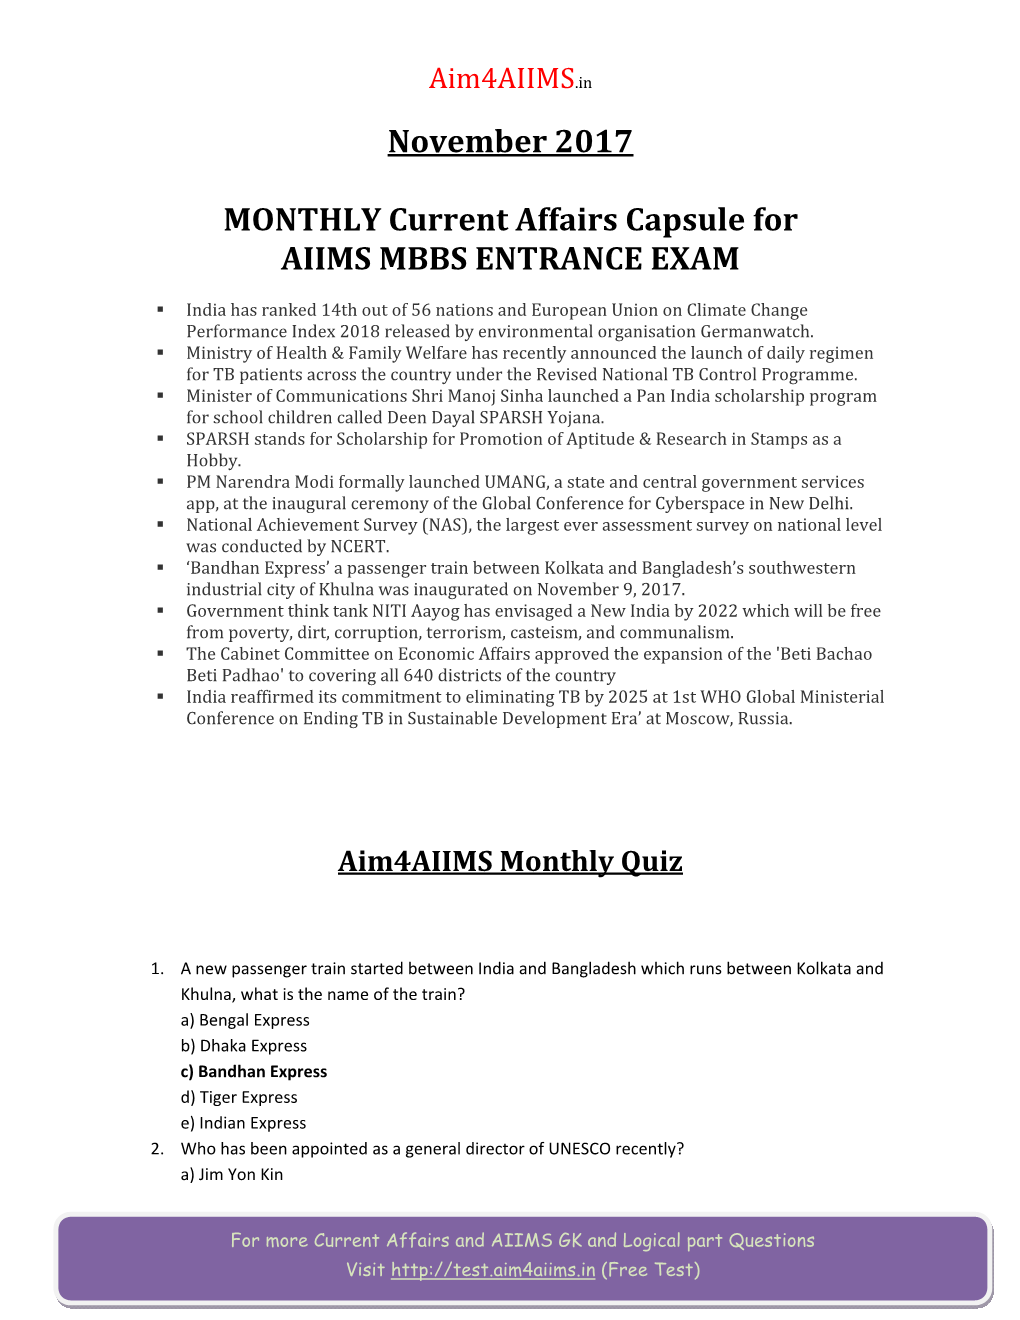 November 2017 MONTHLY Current Affairs Capsule For